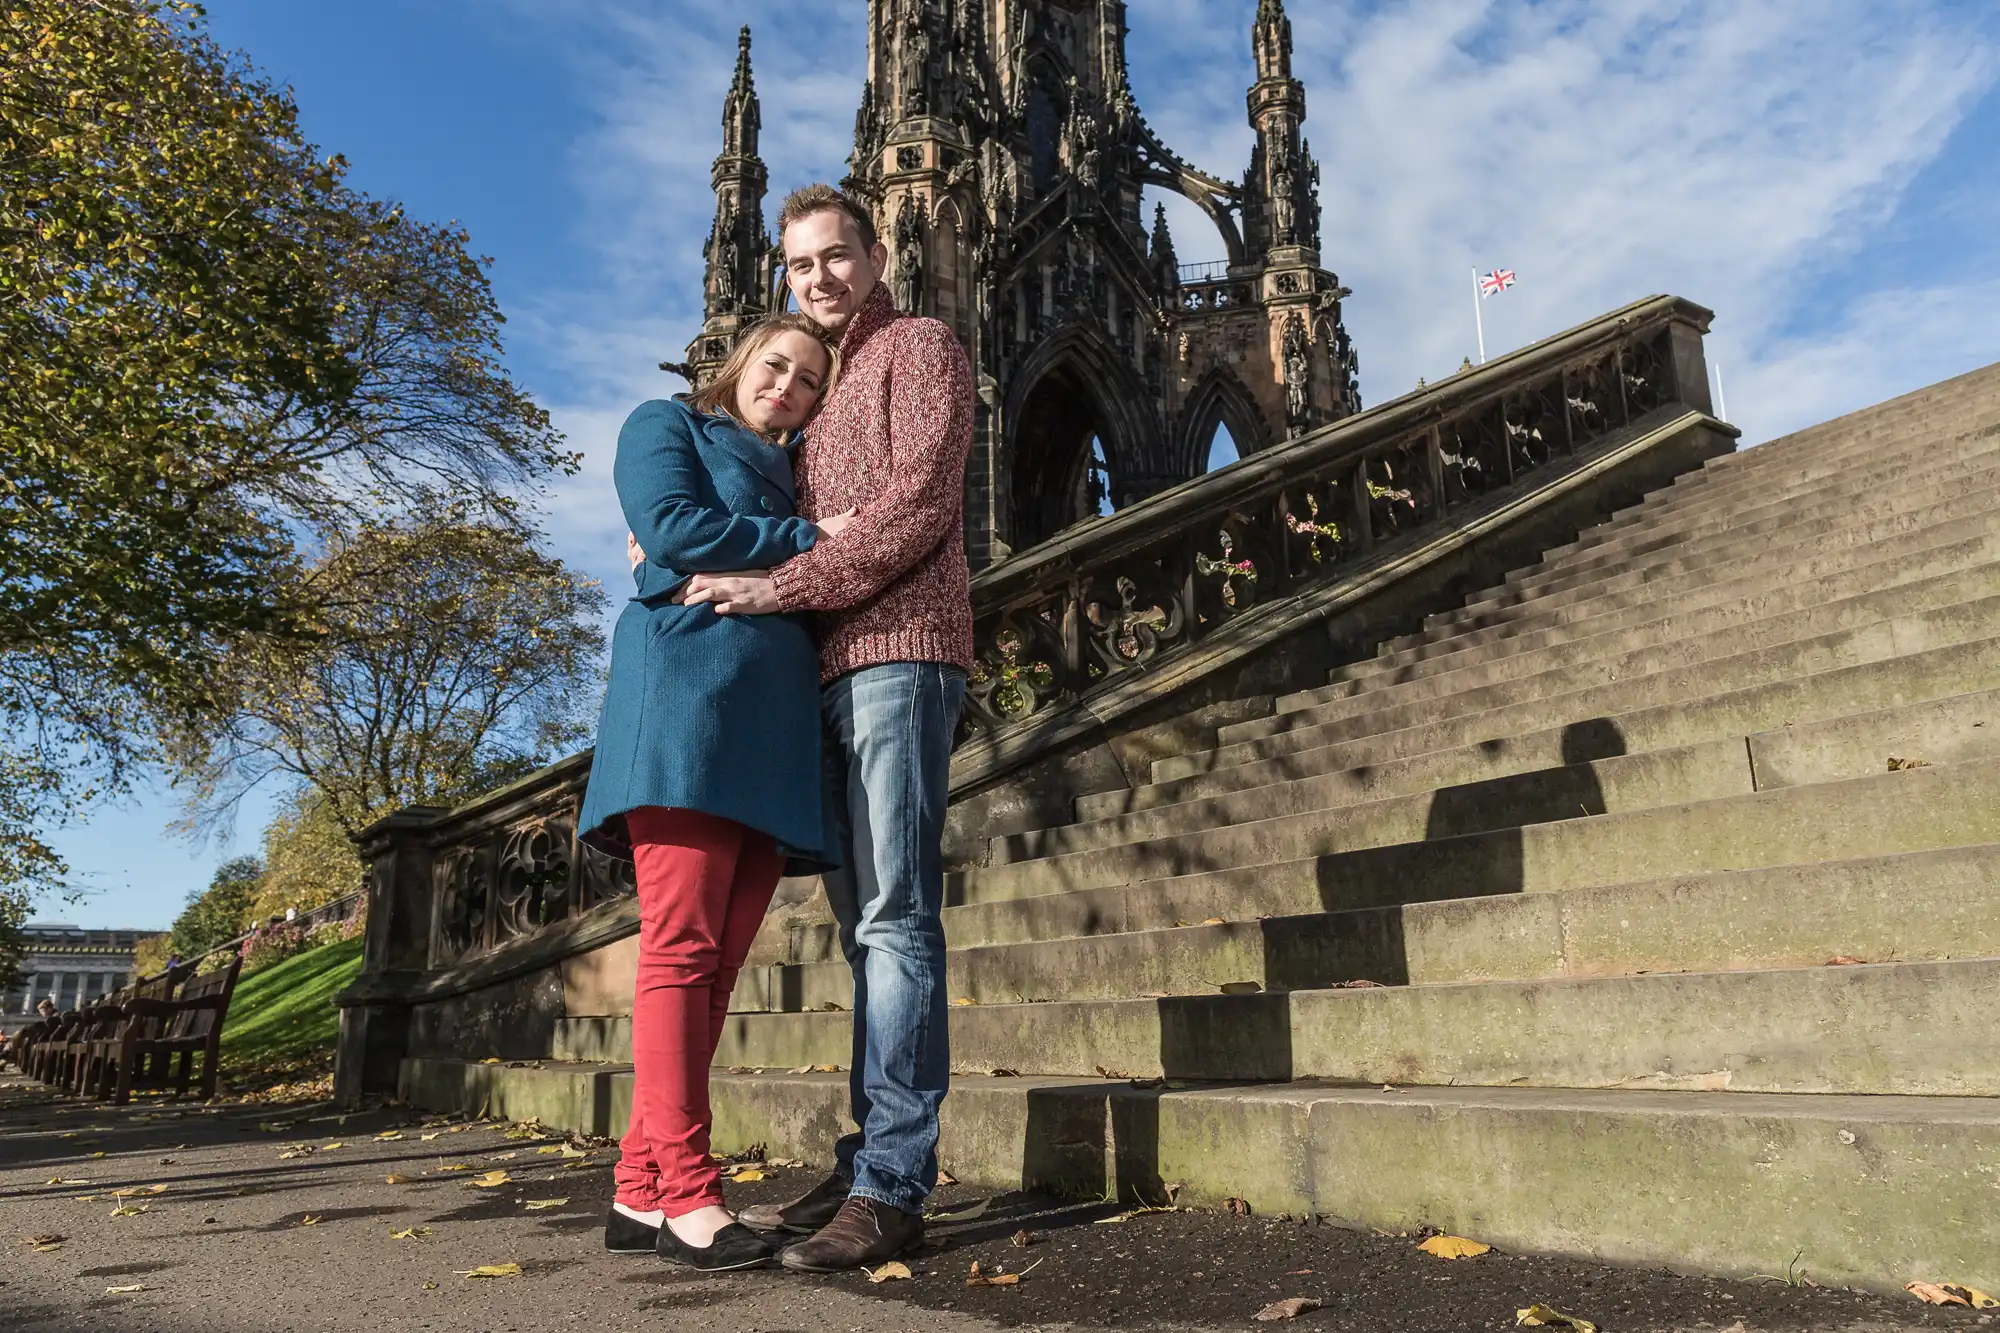 A couple embracing on the steps of a park with the intricate scott monument in the background, under a clear blue sky.